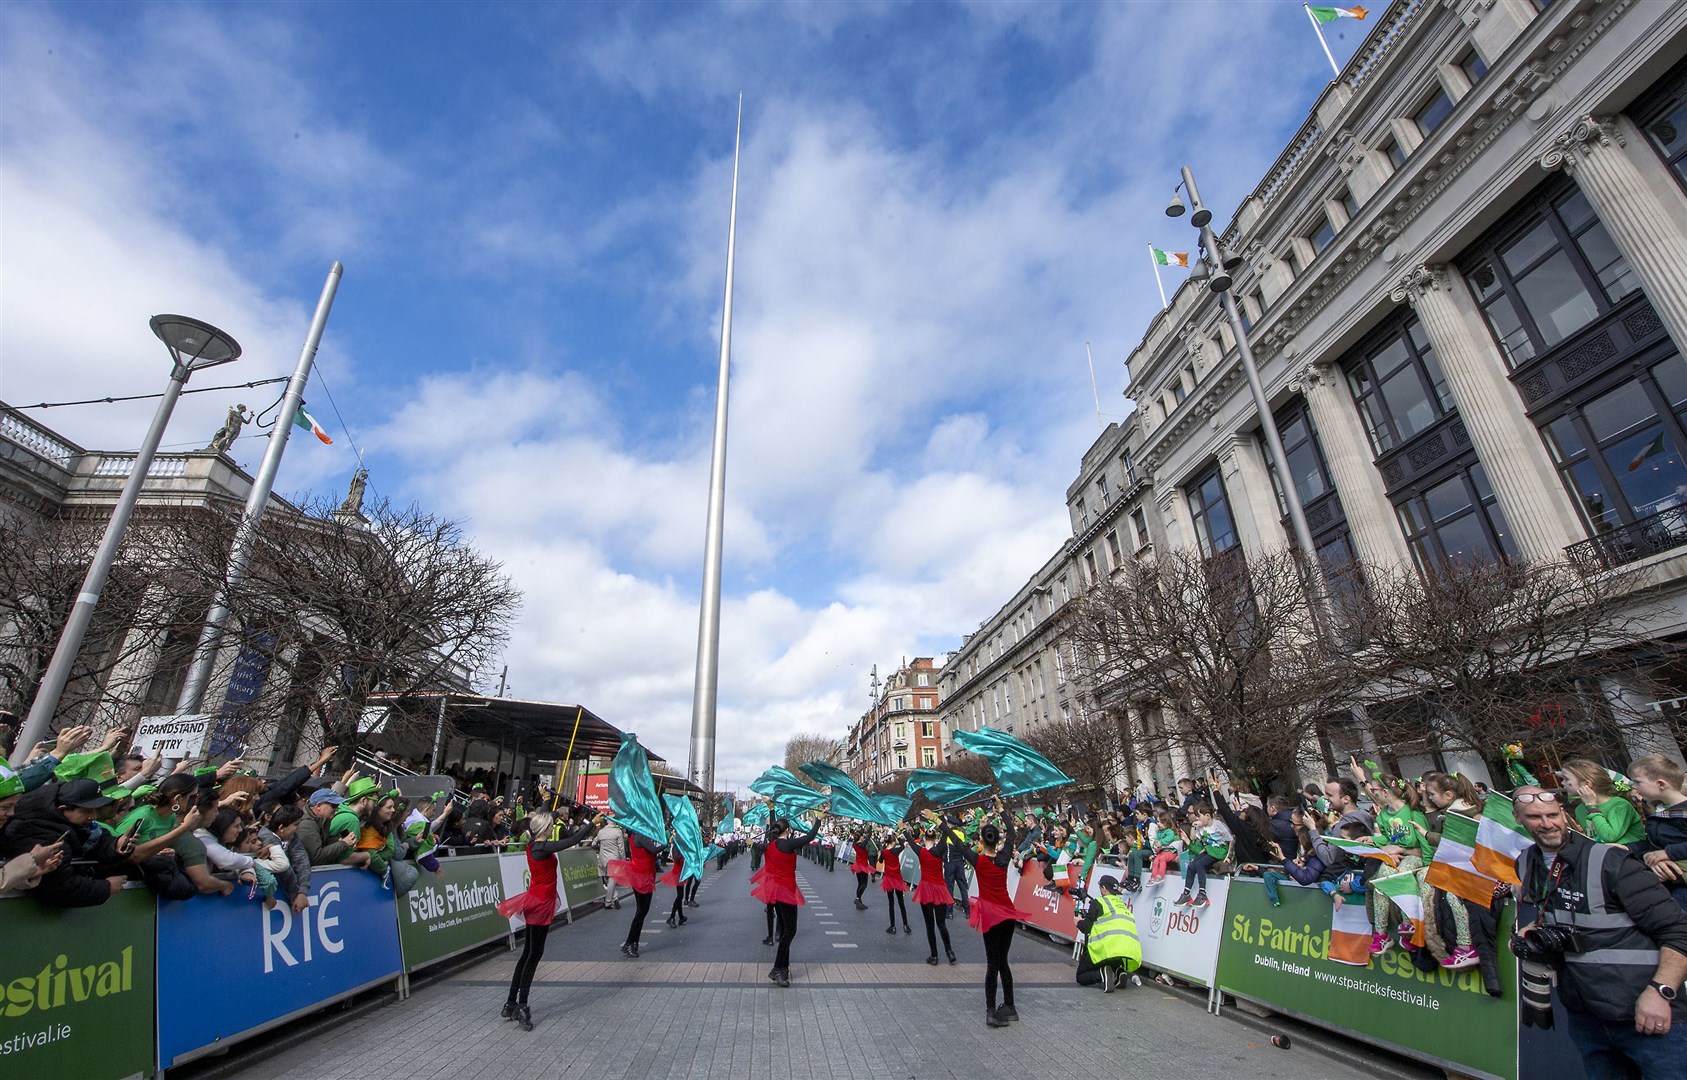 ‘It’s a big happy party!’ Thousands fill Dublin’s streets to